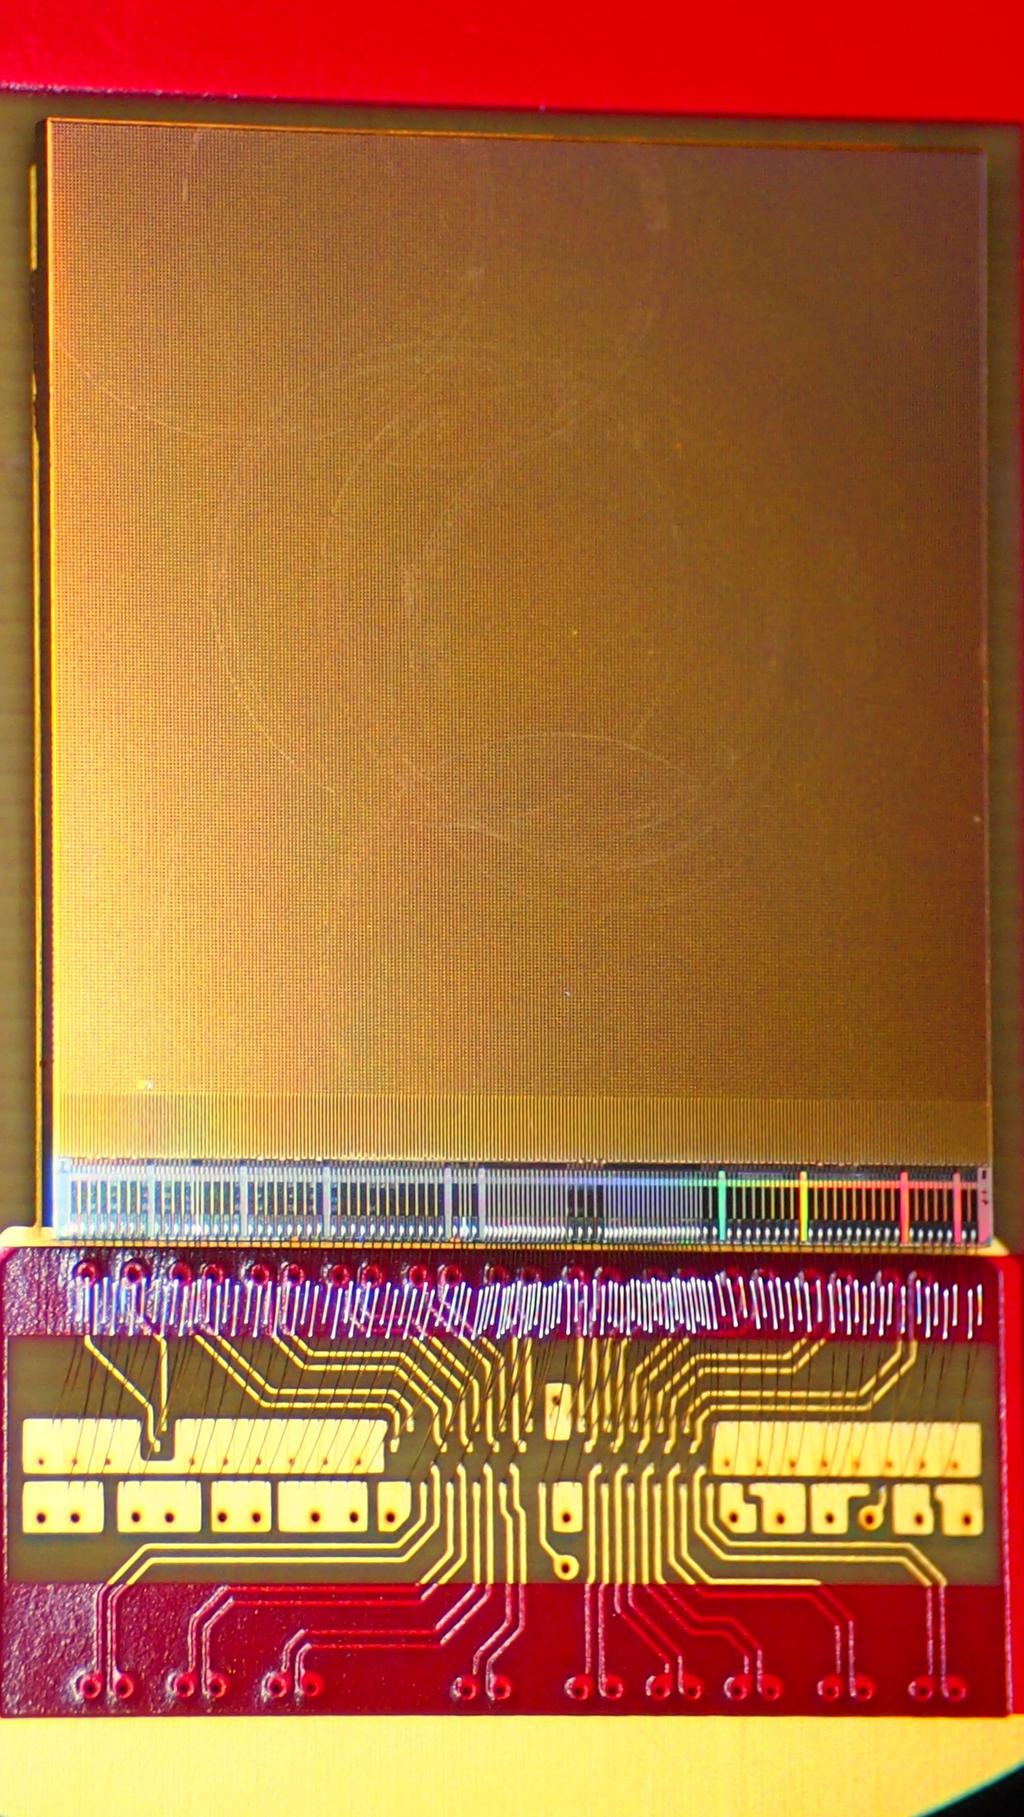 Chapter 2 Timepix3 The object of study in this report is the Timepix3 readout chip. In this chapter a bit of history on the development of the chip will be given.